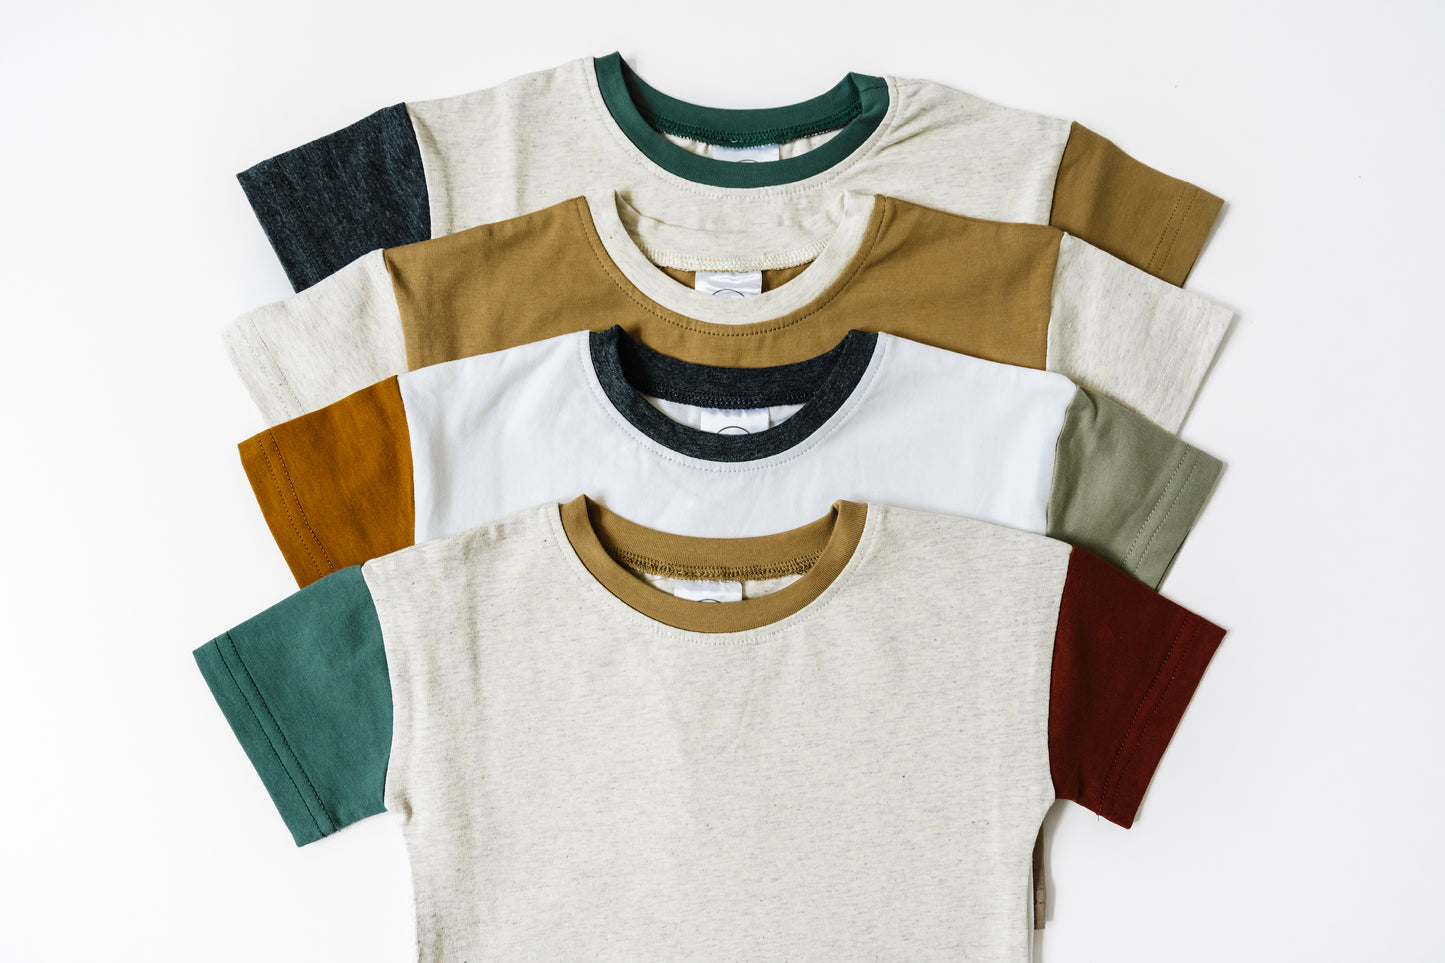 COLOR BLOCK TEE CAMEL/HEATHERED GRAY